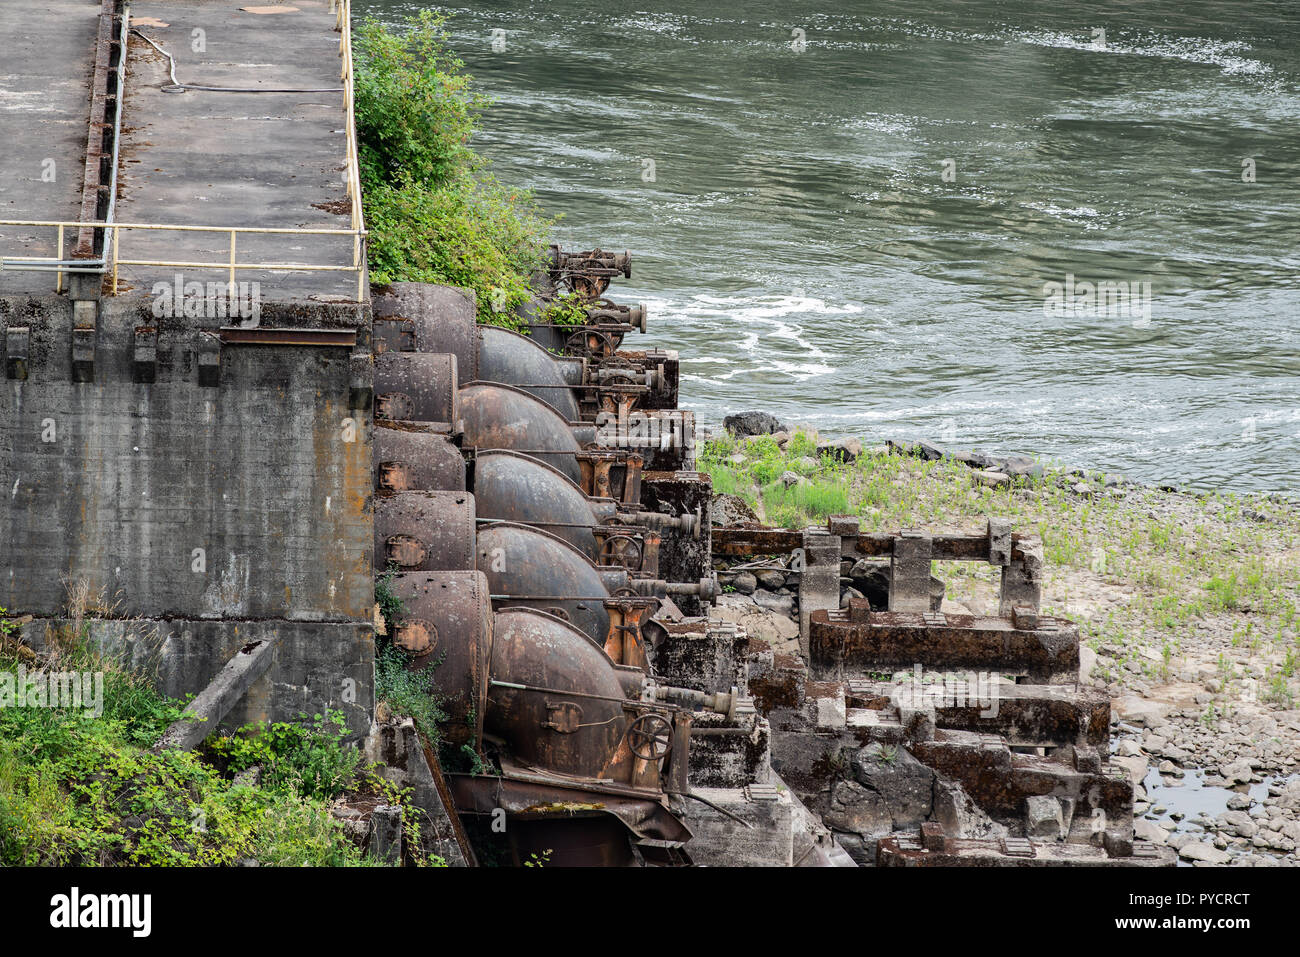 Abandoned old falling apart rusty factory on the Willamette river. Rusting industrial water pumps next to the concrete station. Stock Photo